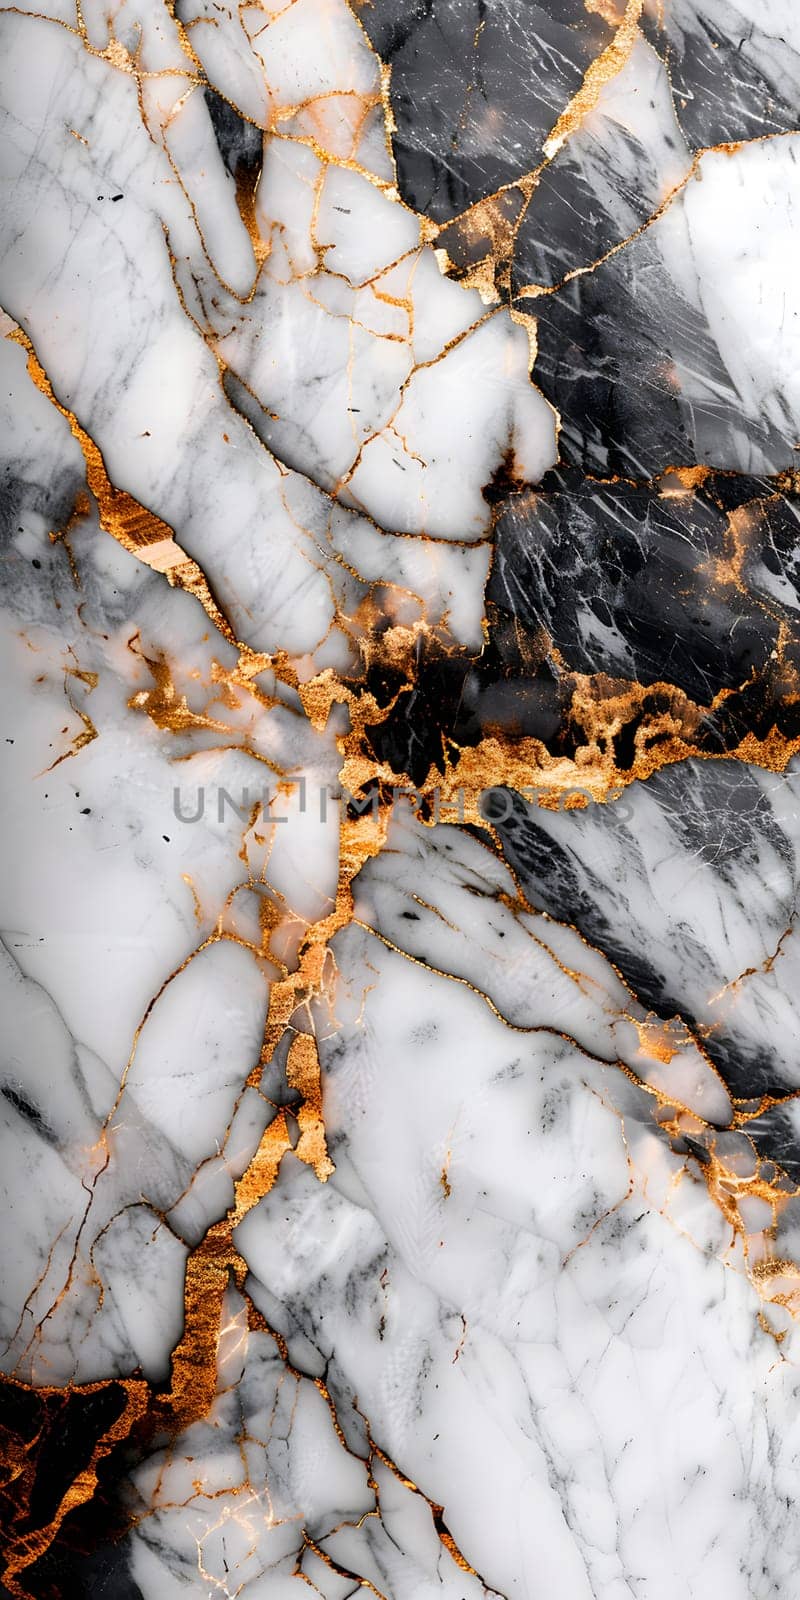 A close up of marble pattern with gold veins, resembling natural landscape by Nadtochiy